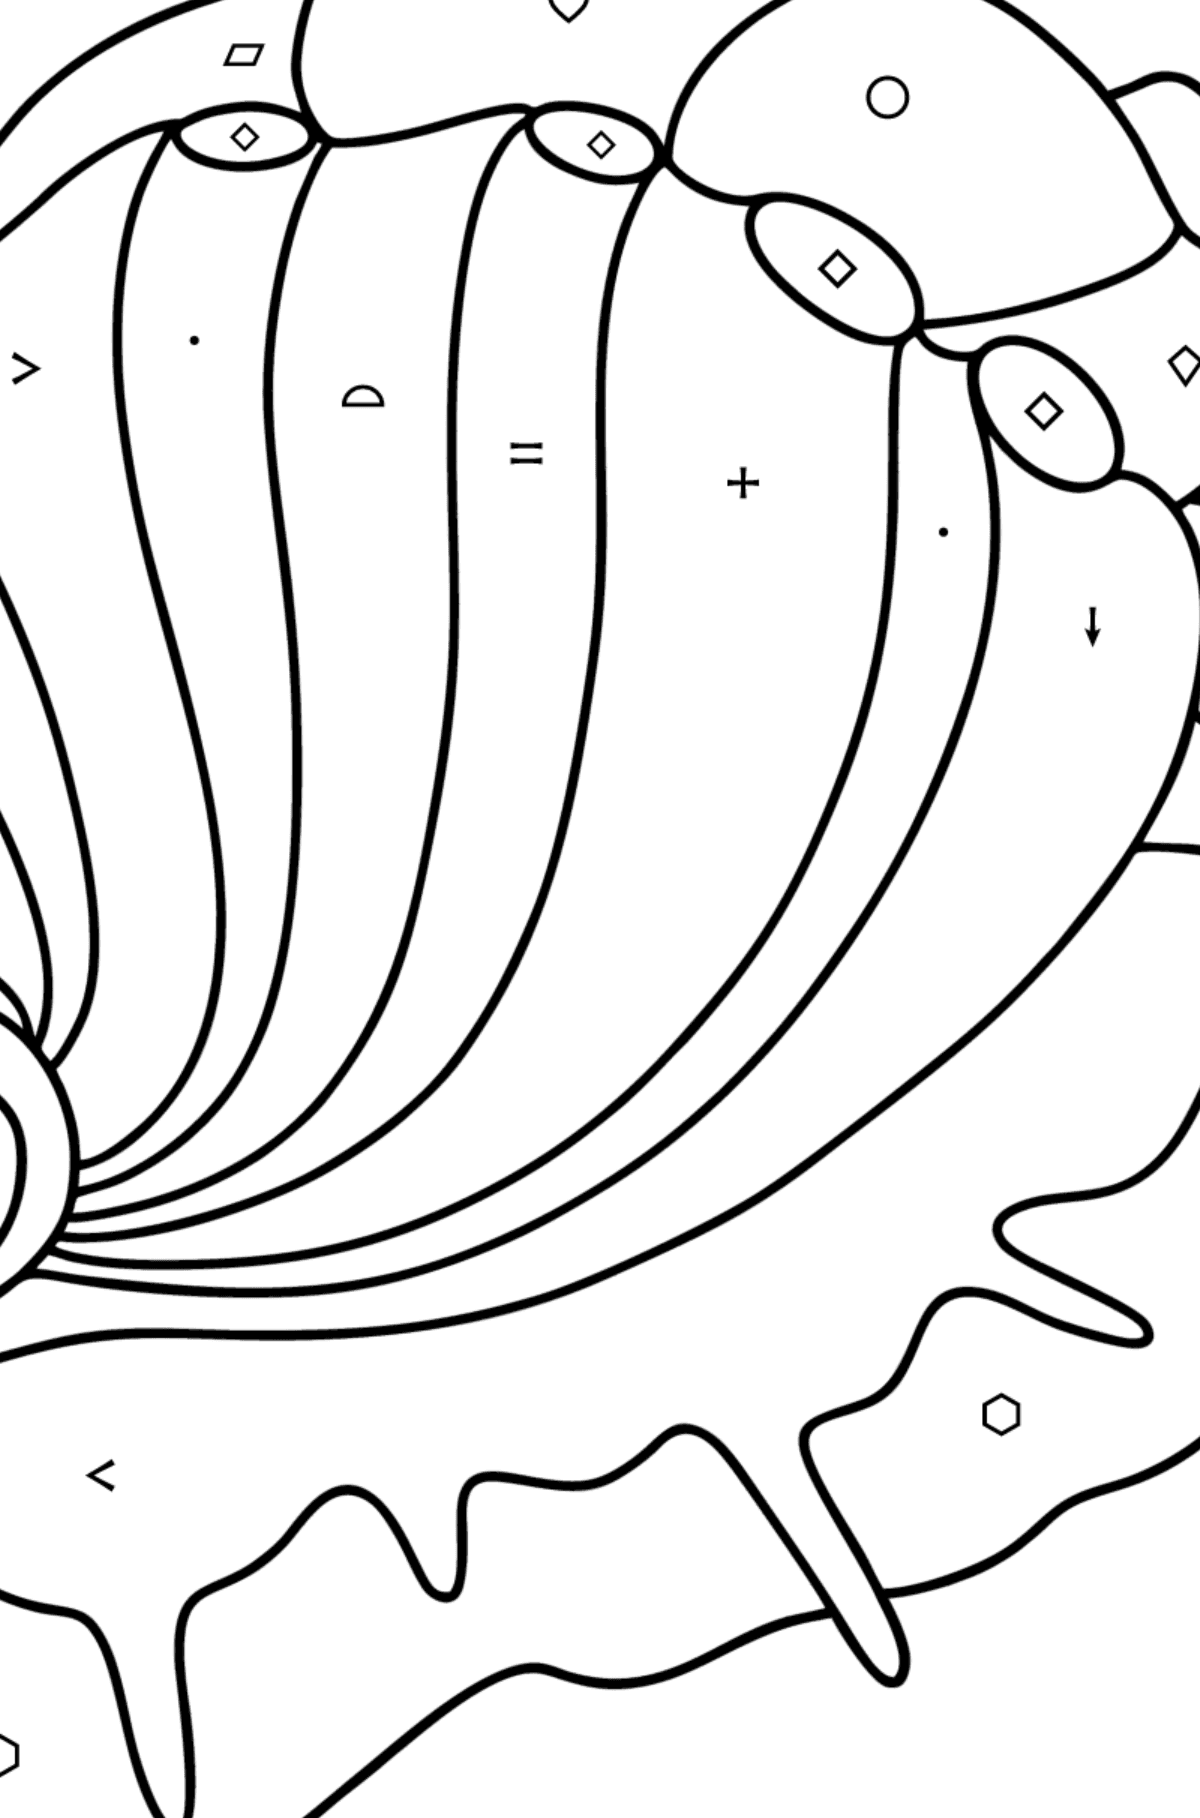 Mollusk abalone coloring page - Coloring by Symbols and Geometric Shapes for Kids